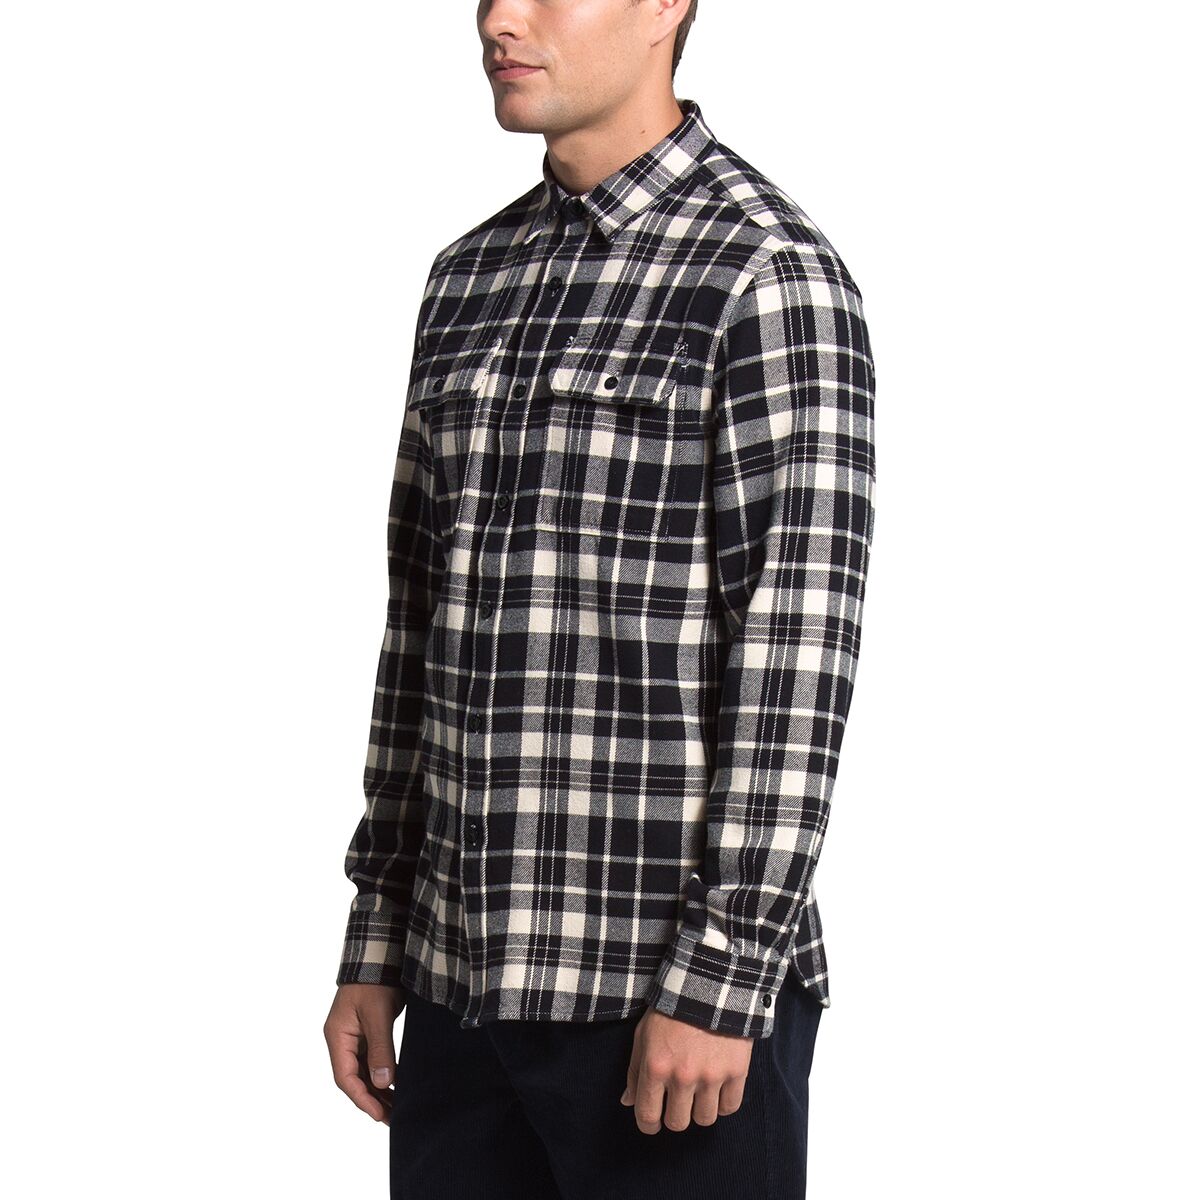 The North Face Arroyo Long-Sleeve Flannel Shirt - Men's | Backcountry.com